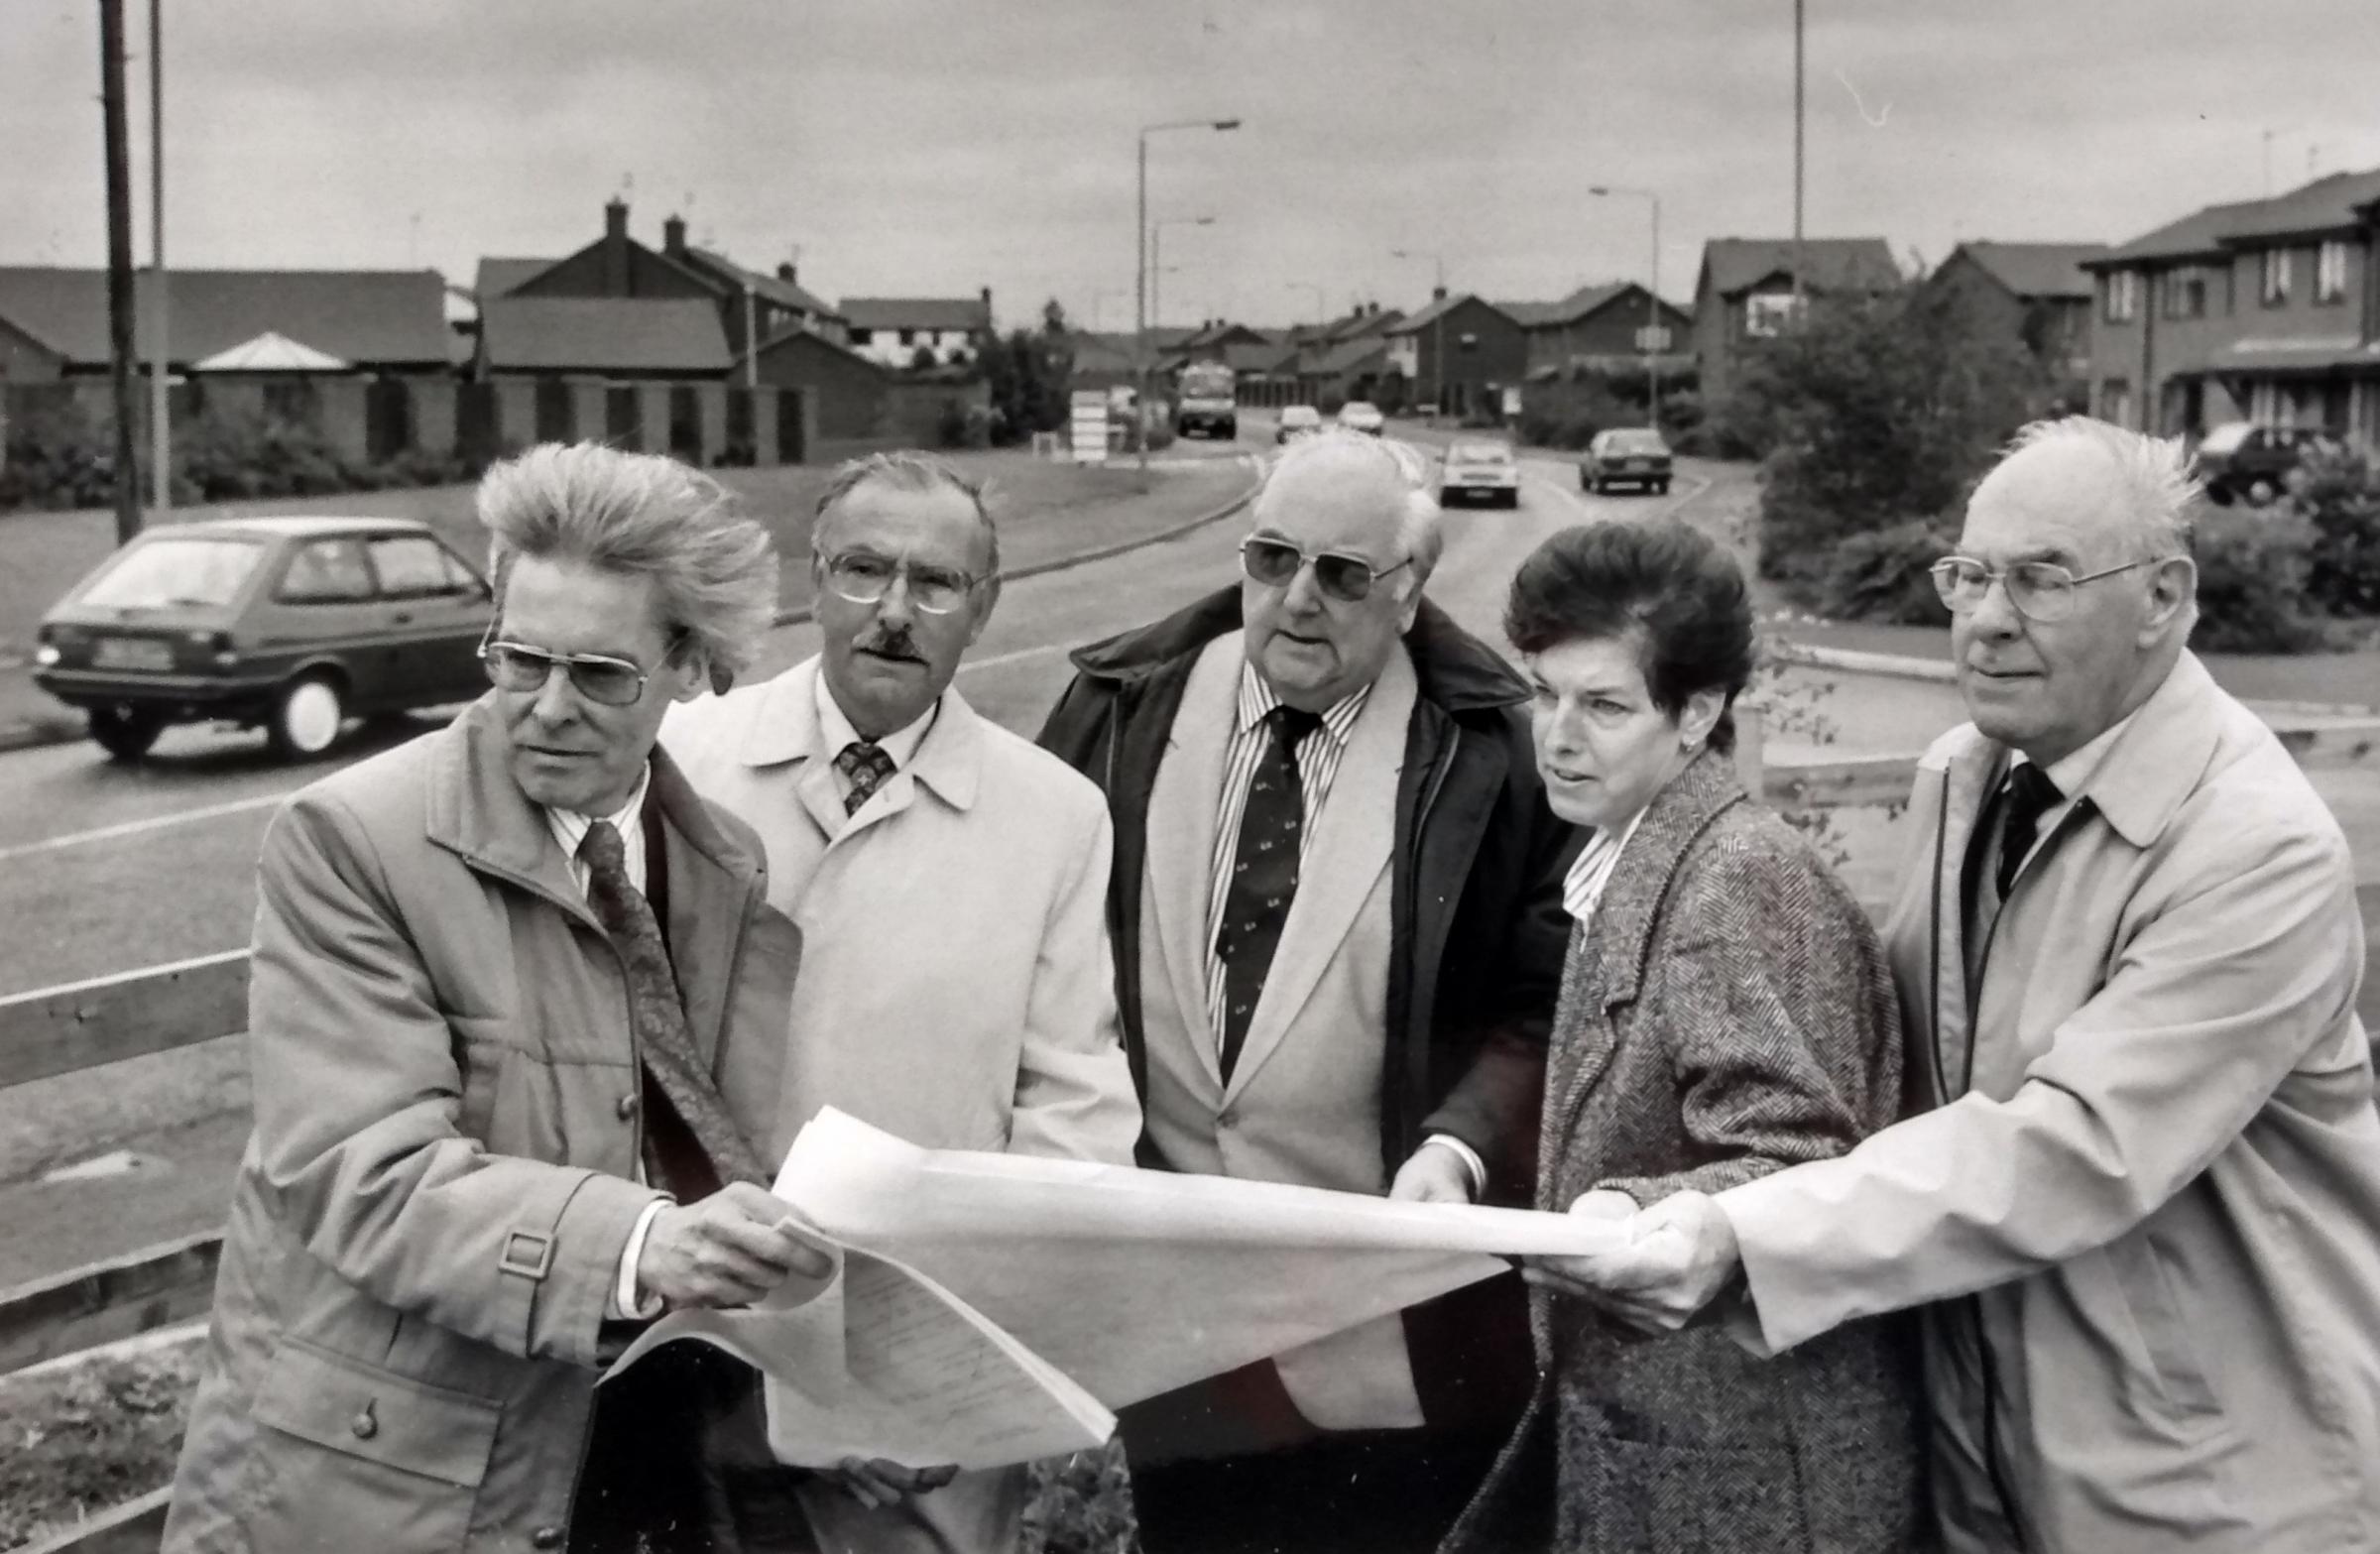 A perennial problem - speeding on St Peters Drive. Tony Russell, left, discusses concerns with local councillors and residents in October 1990